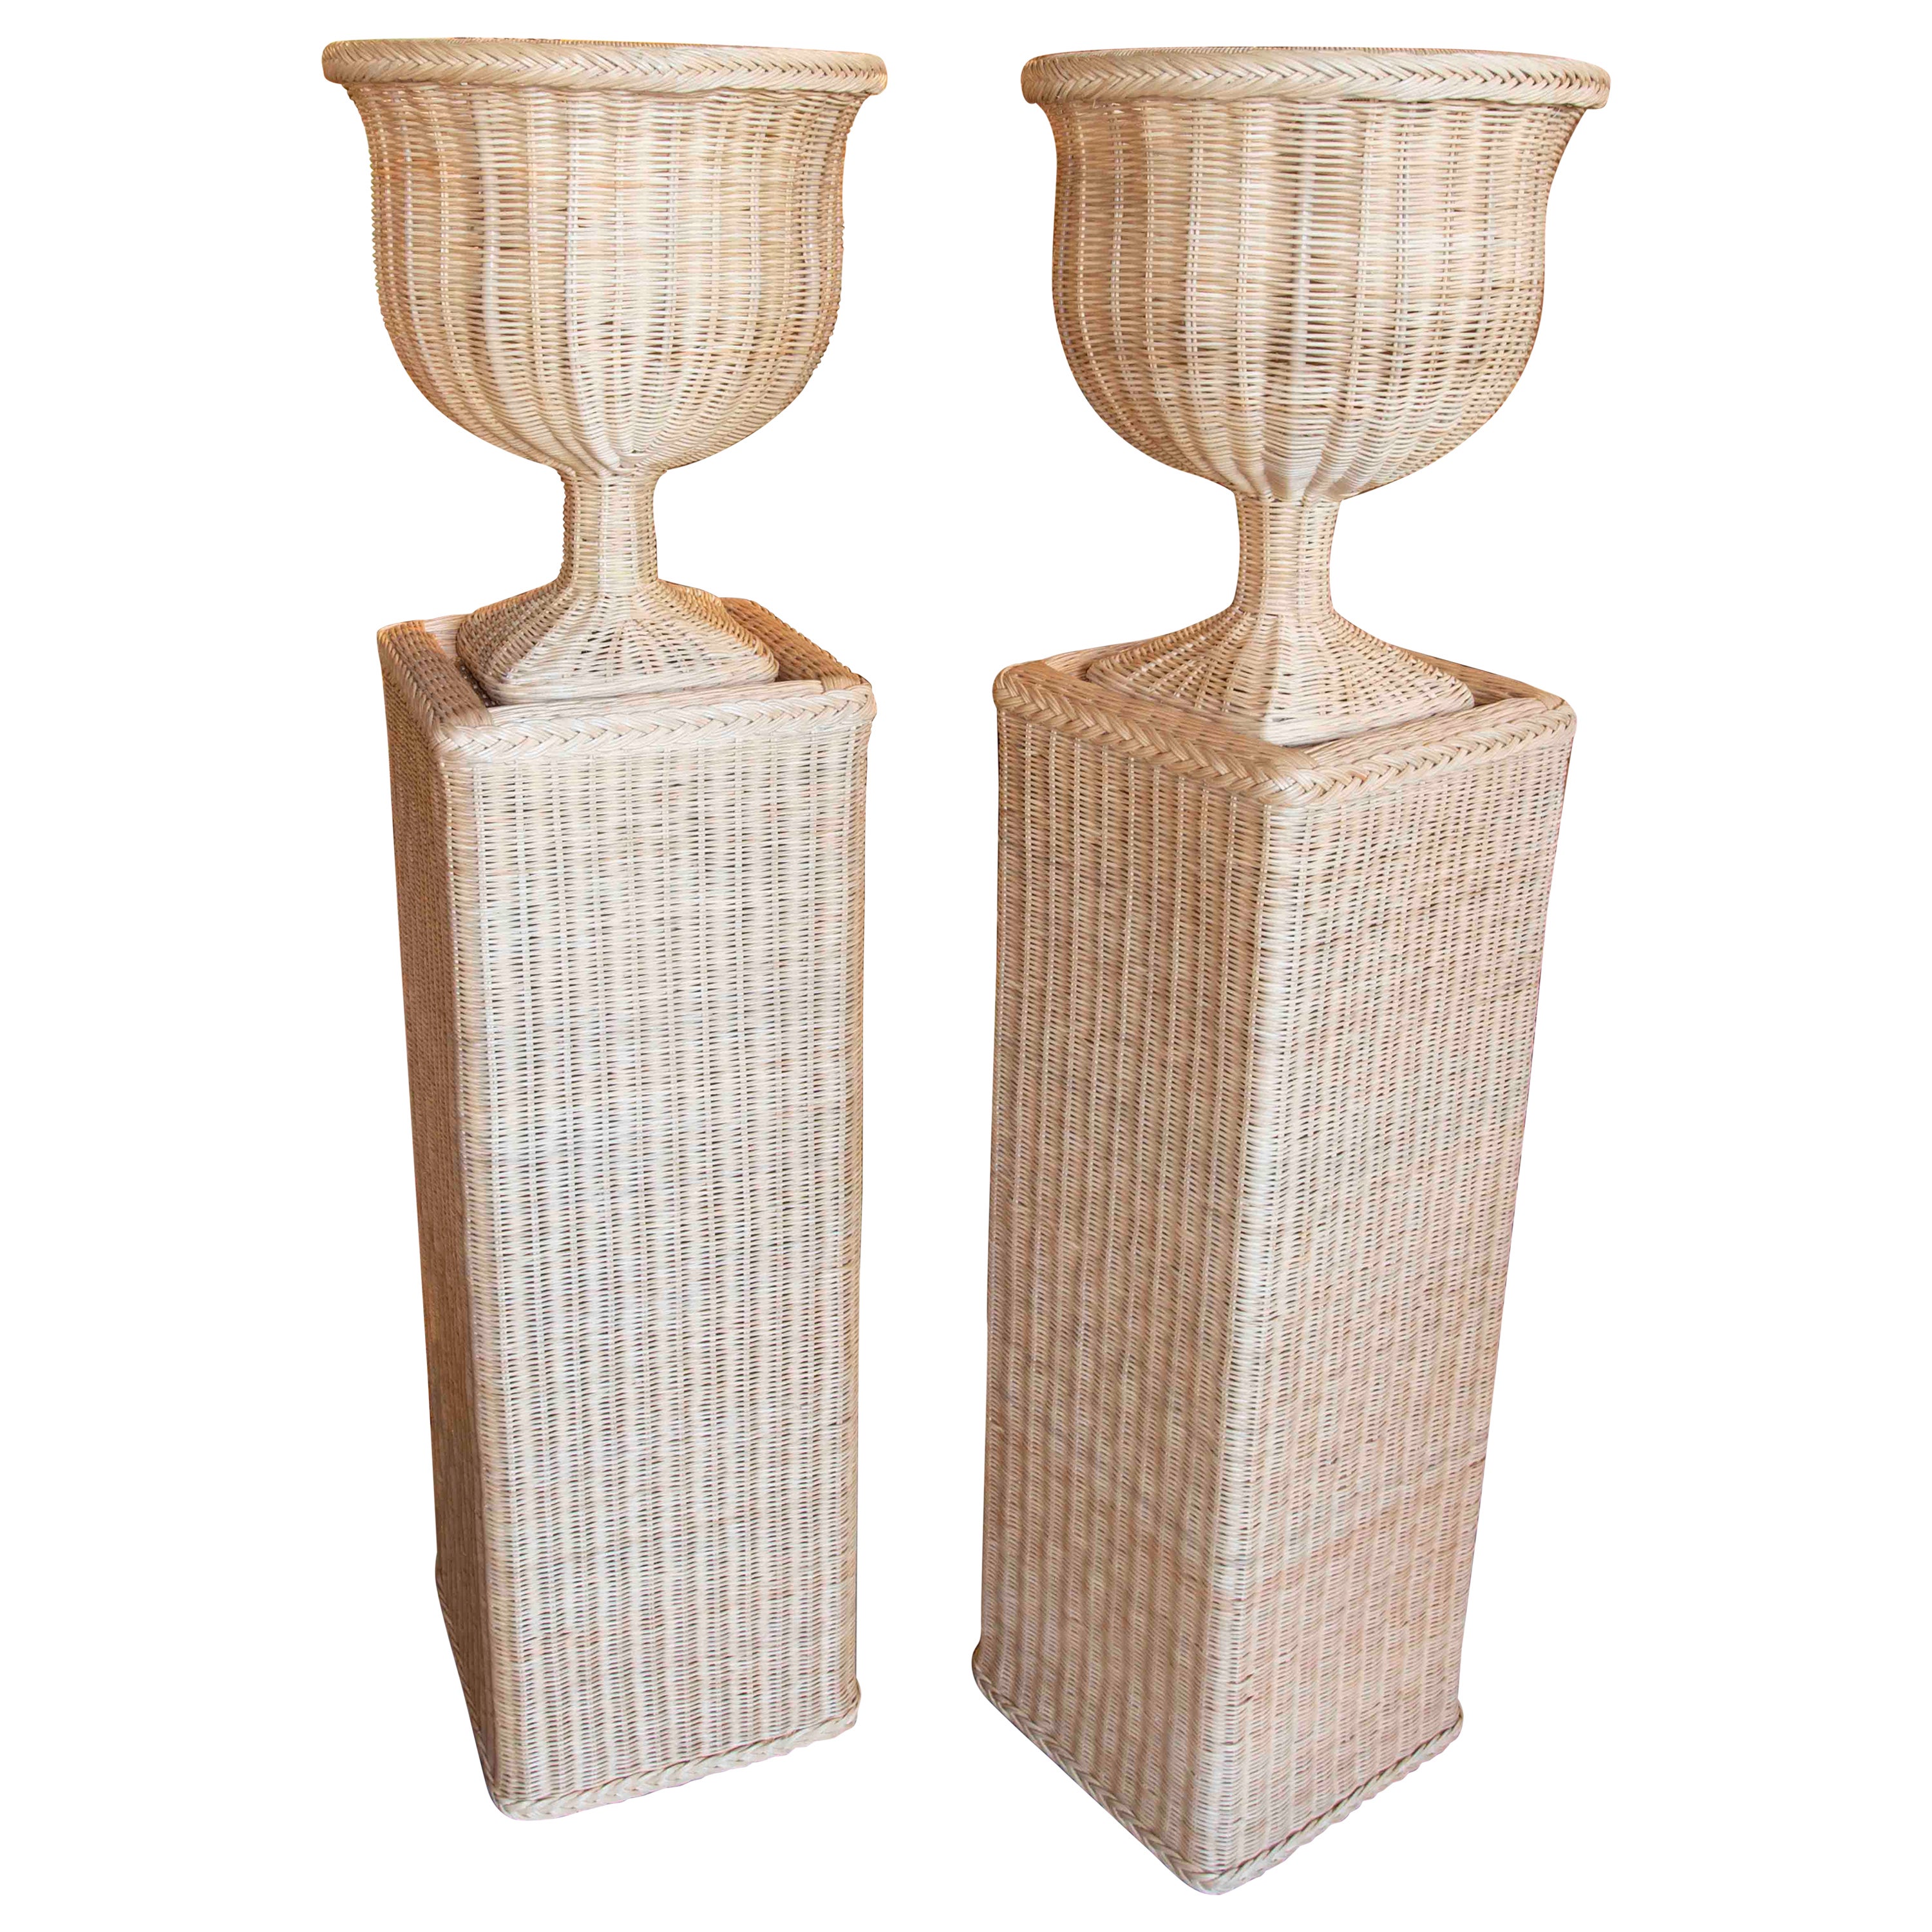 Pair of Handmade Wicker Urns with Rectangular Bases and Iron Structure For Sale